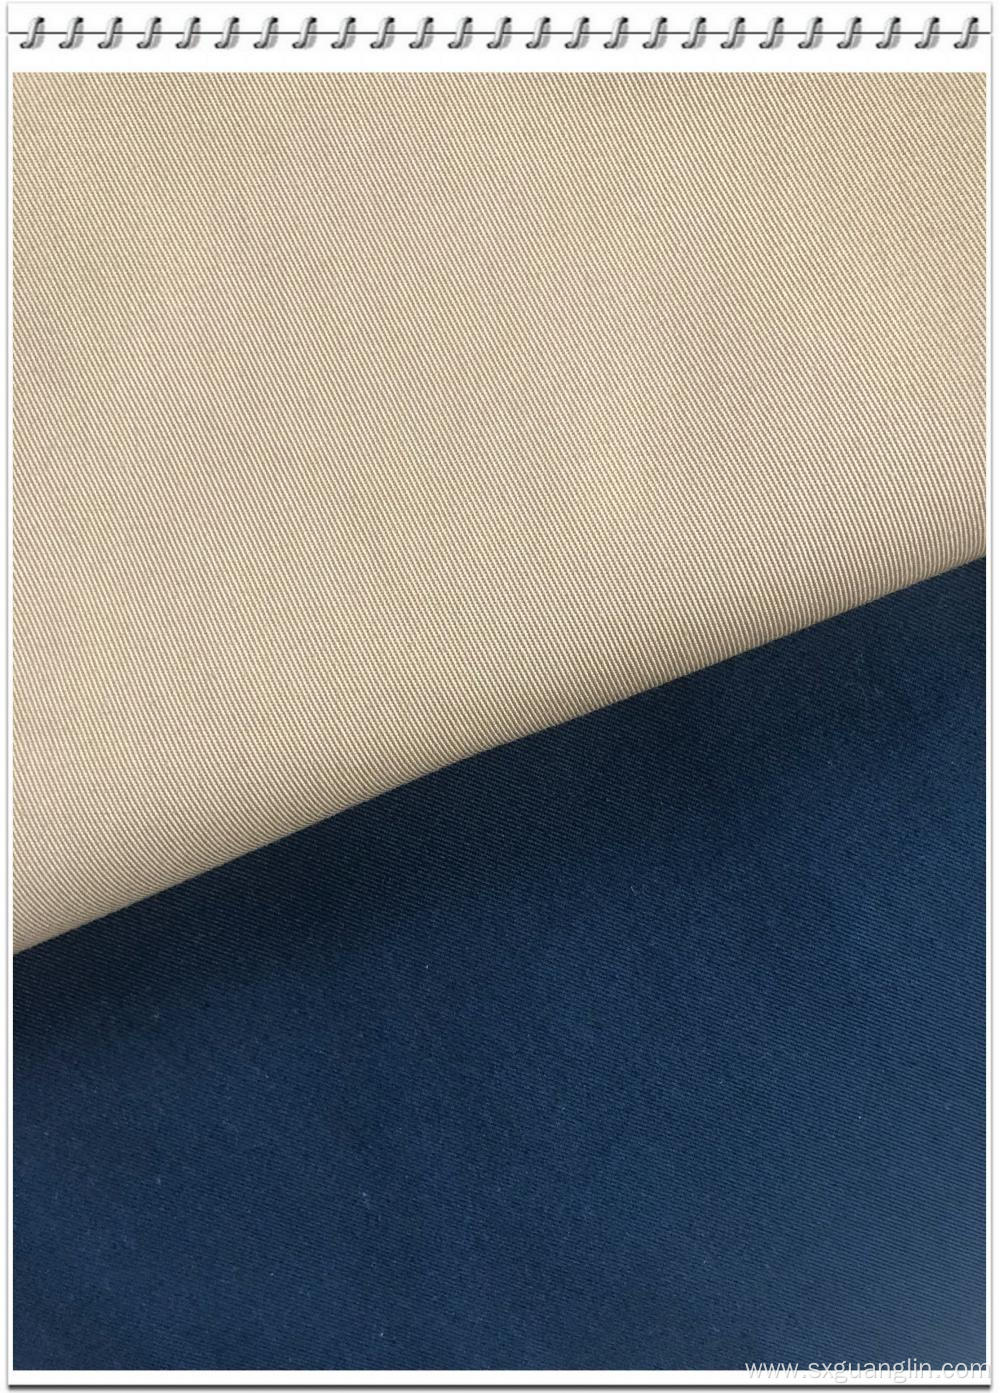 65%Polyester 35%Cotton Twill Workes Fabric